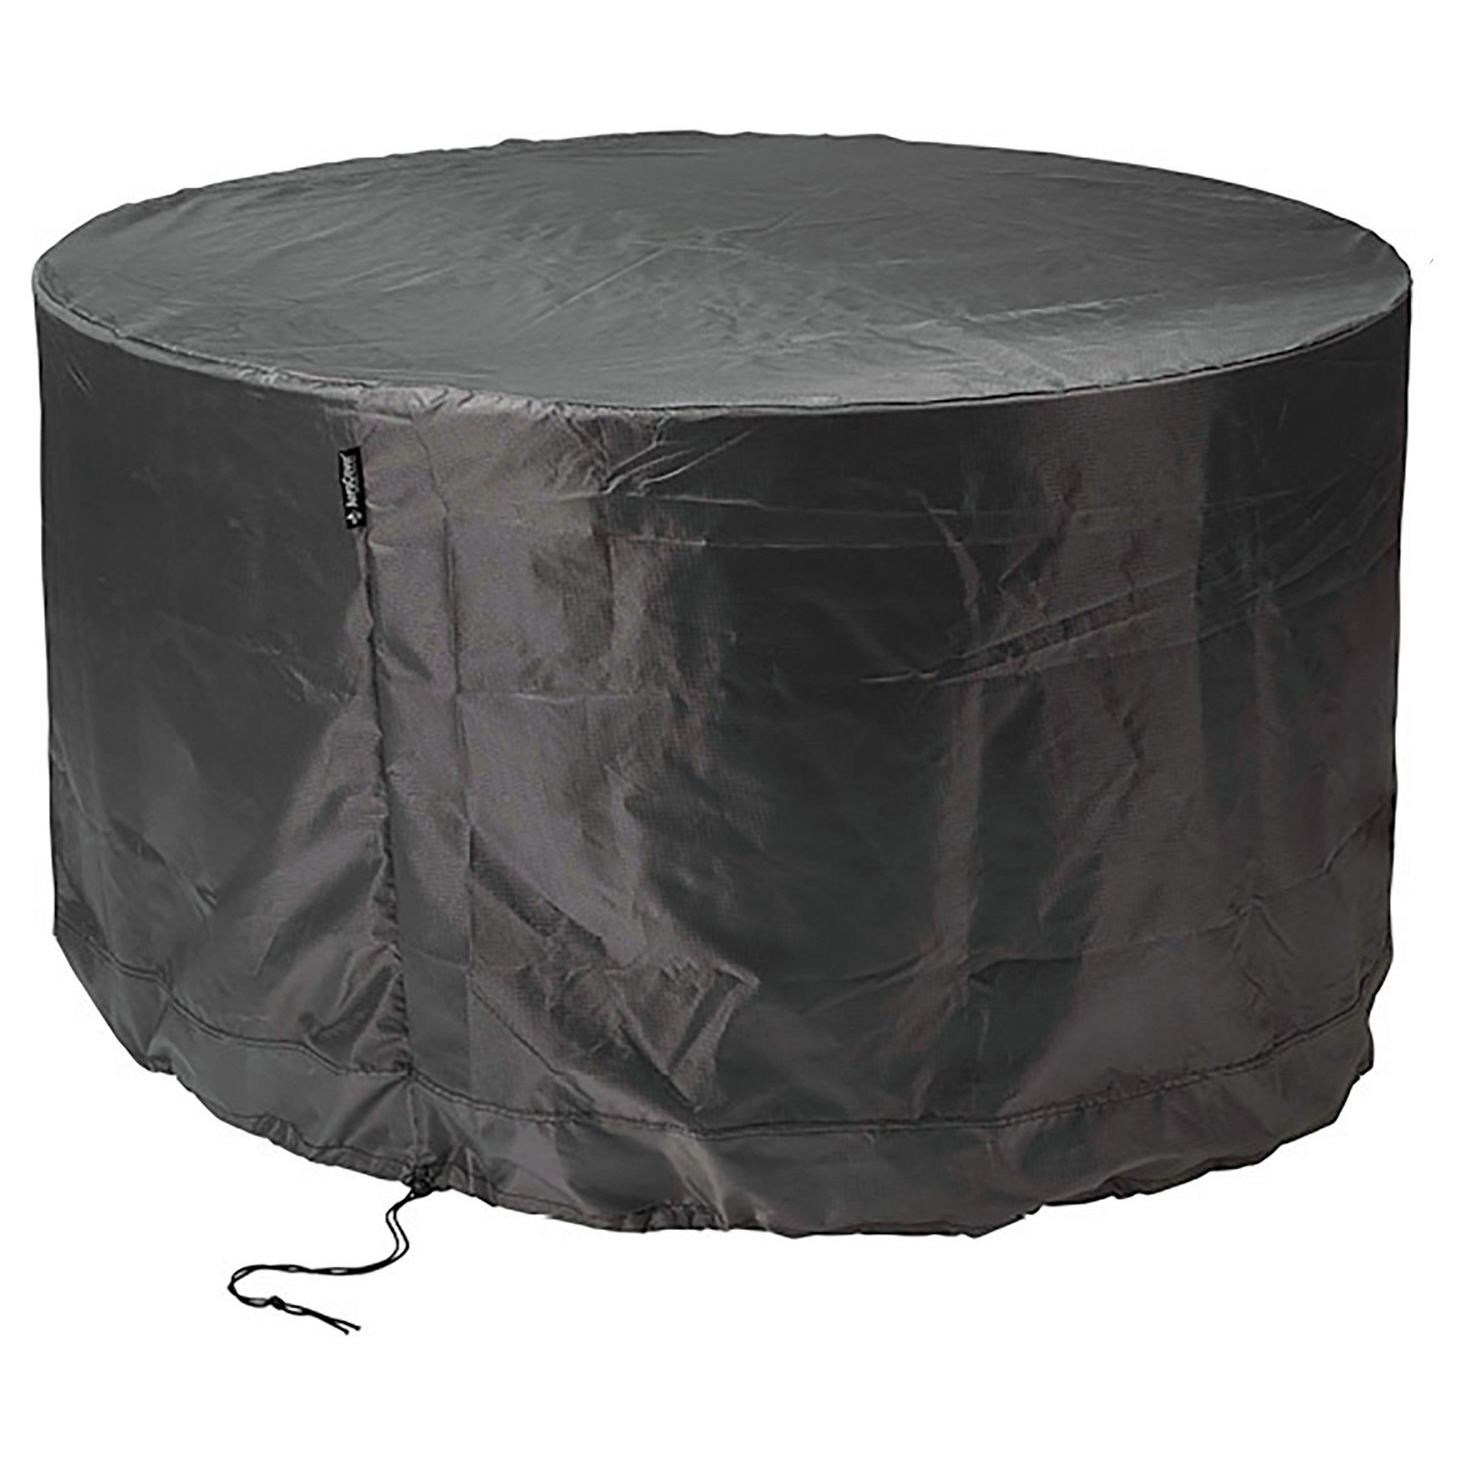 Pacific Round Patio Set Cover - image 1